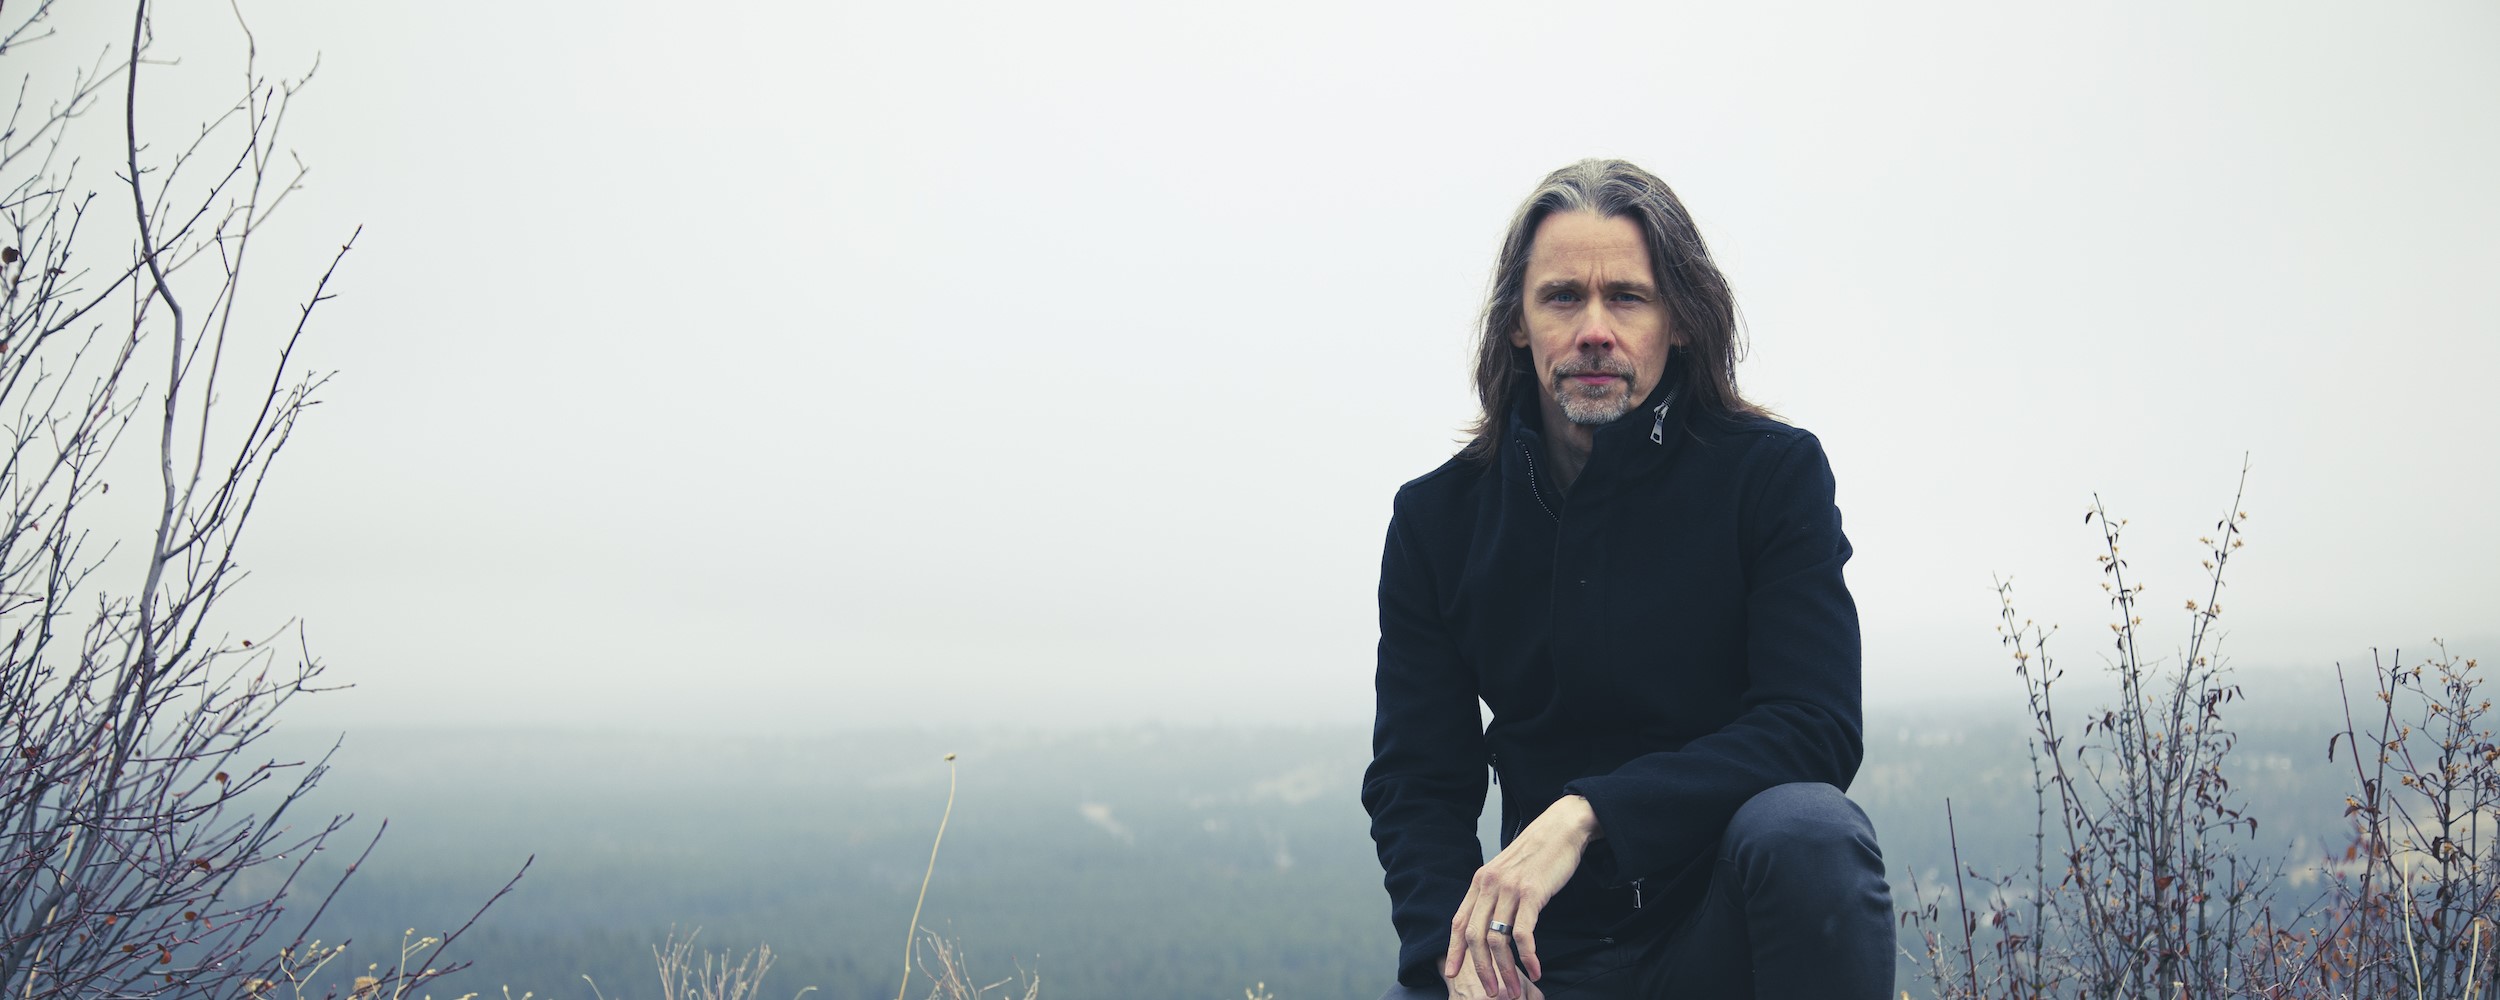 Myles Kennedy Gets Back to His Guitar Roots for Second Album ‘The Ides of March’